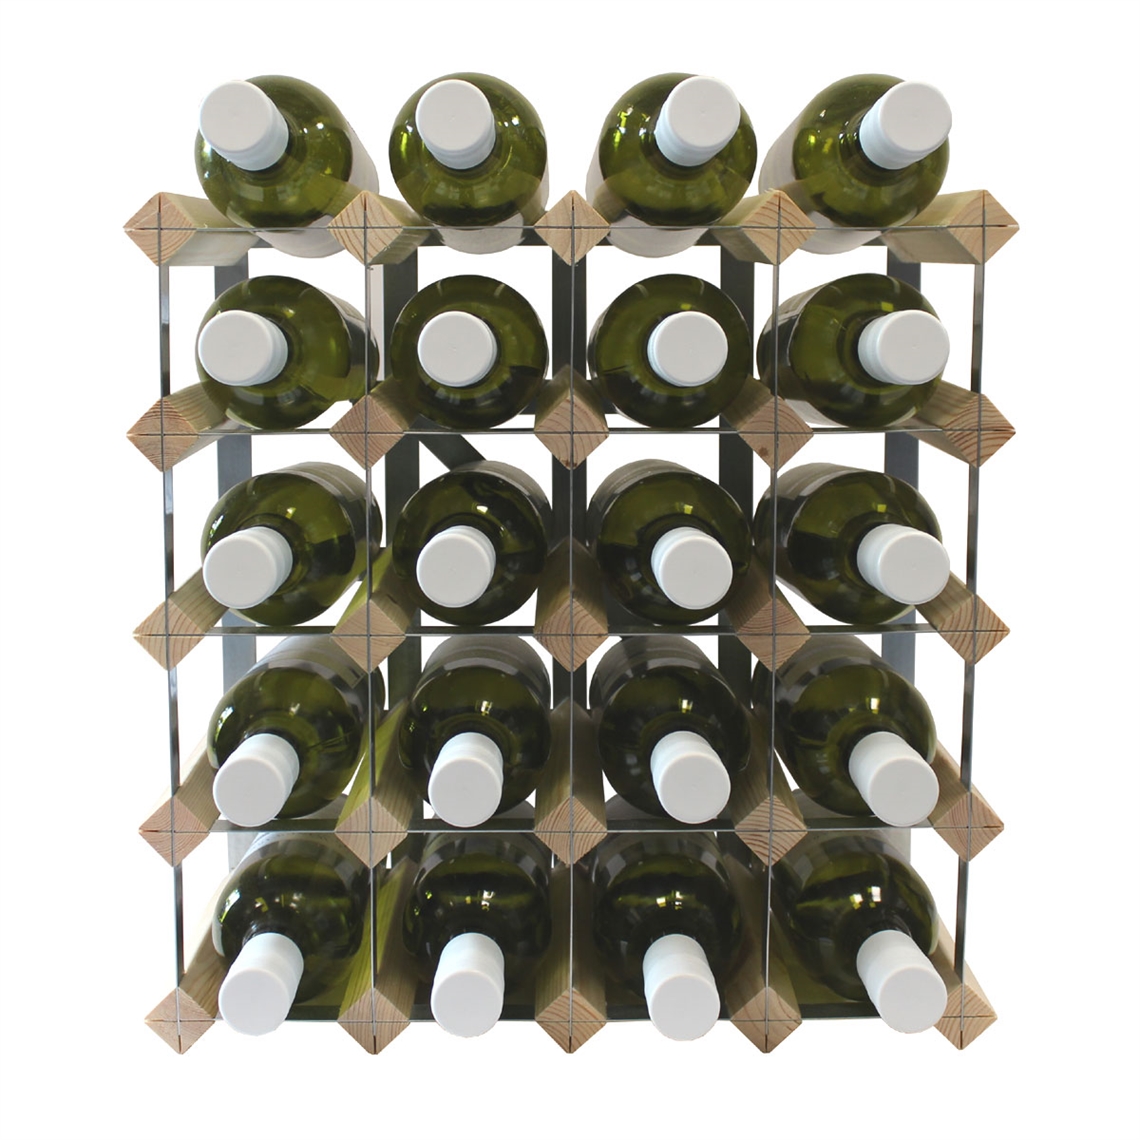 View more cellarstak from our Assembled Wine Racks range